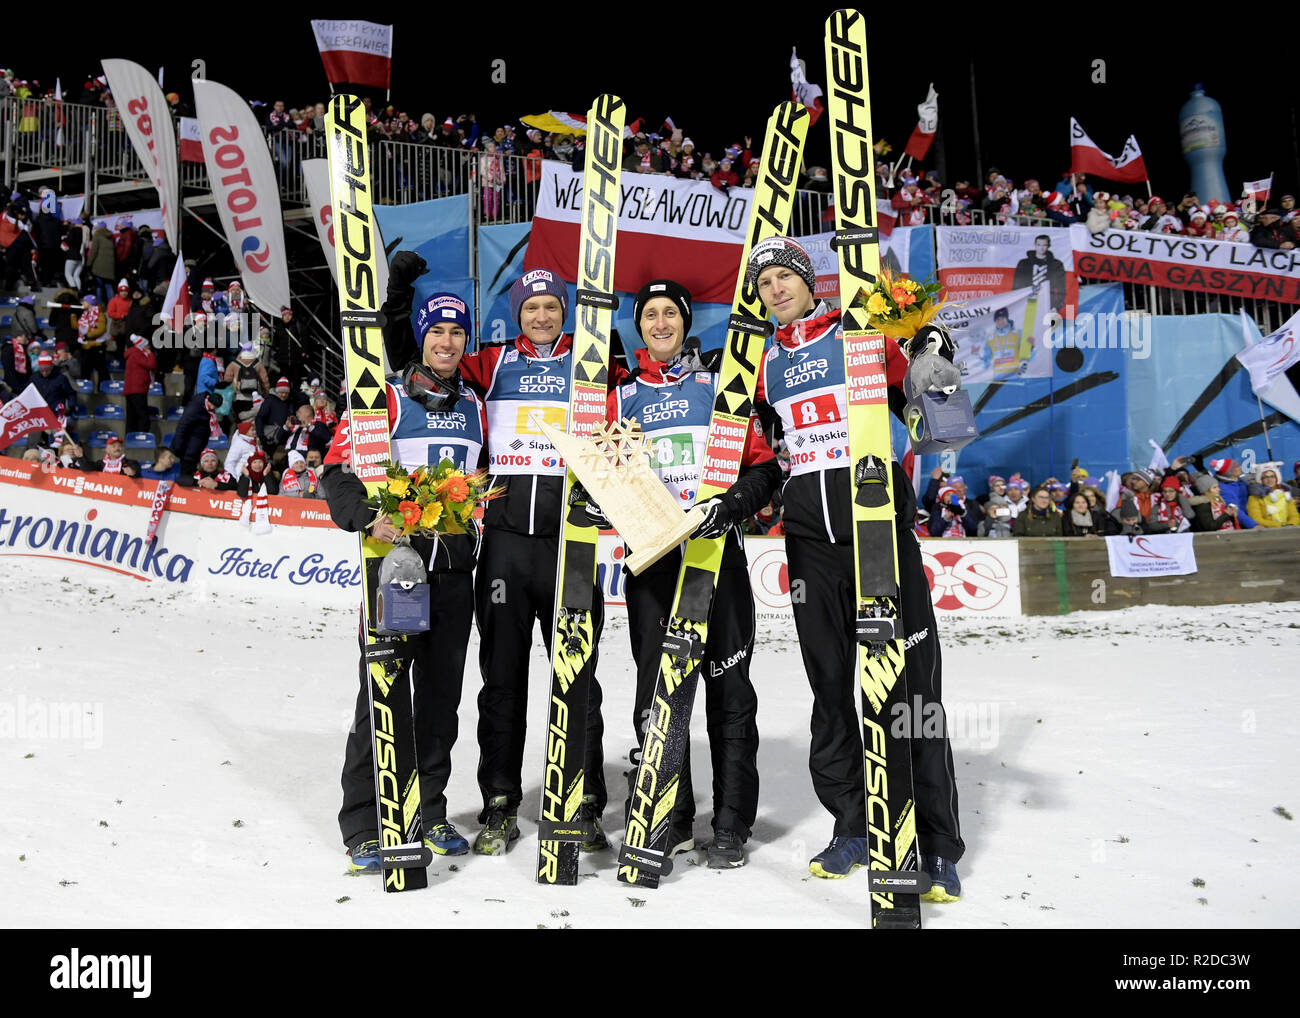 Michael Haybock, Clemens Aigner, Daniel Huber, Stefan Kraft  Poland wins the first team competition of the season in ski jumping on November 17, 2018 in Wisla, Poland. Stock Photo